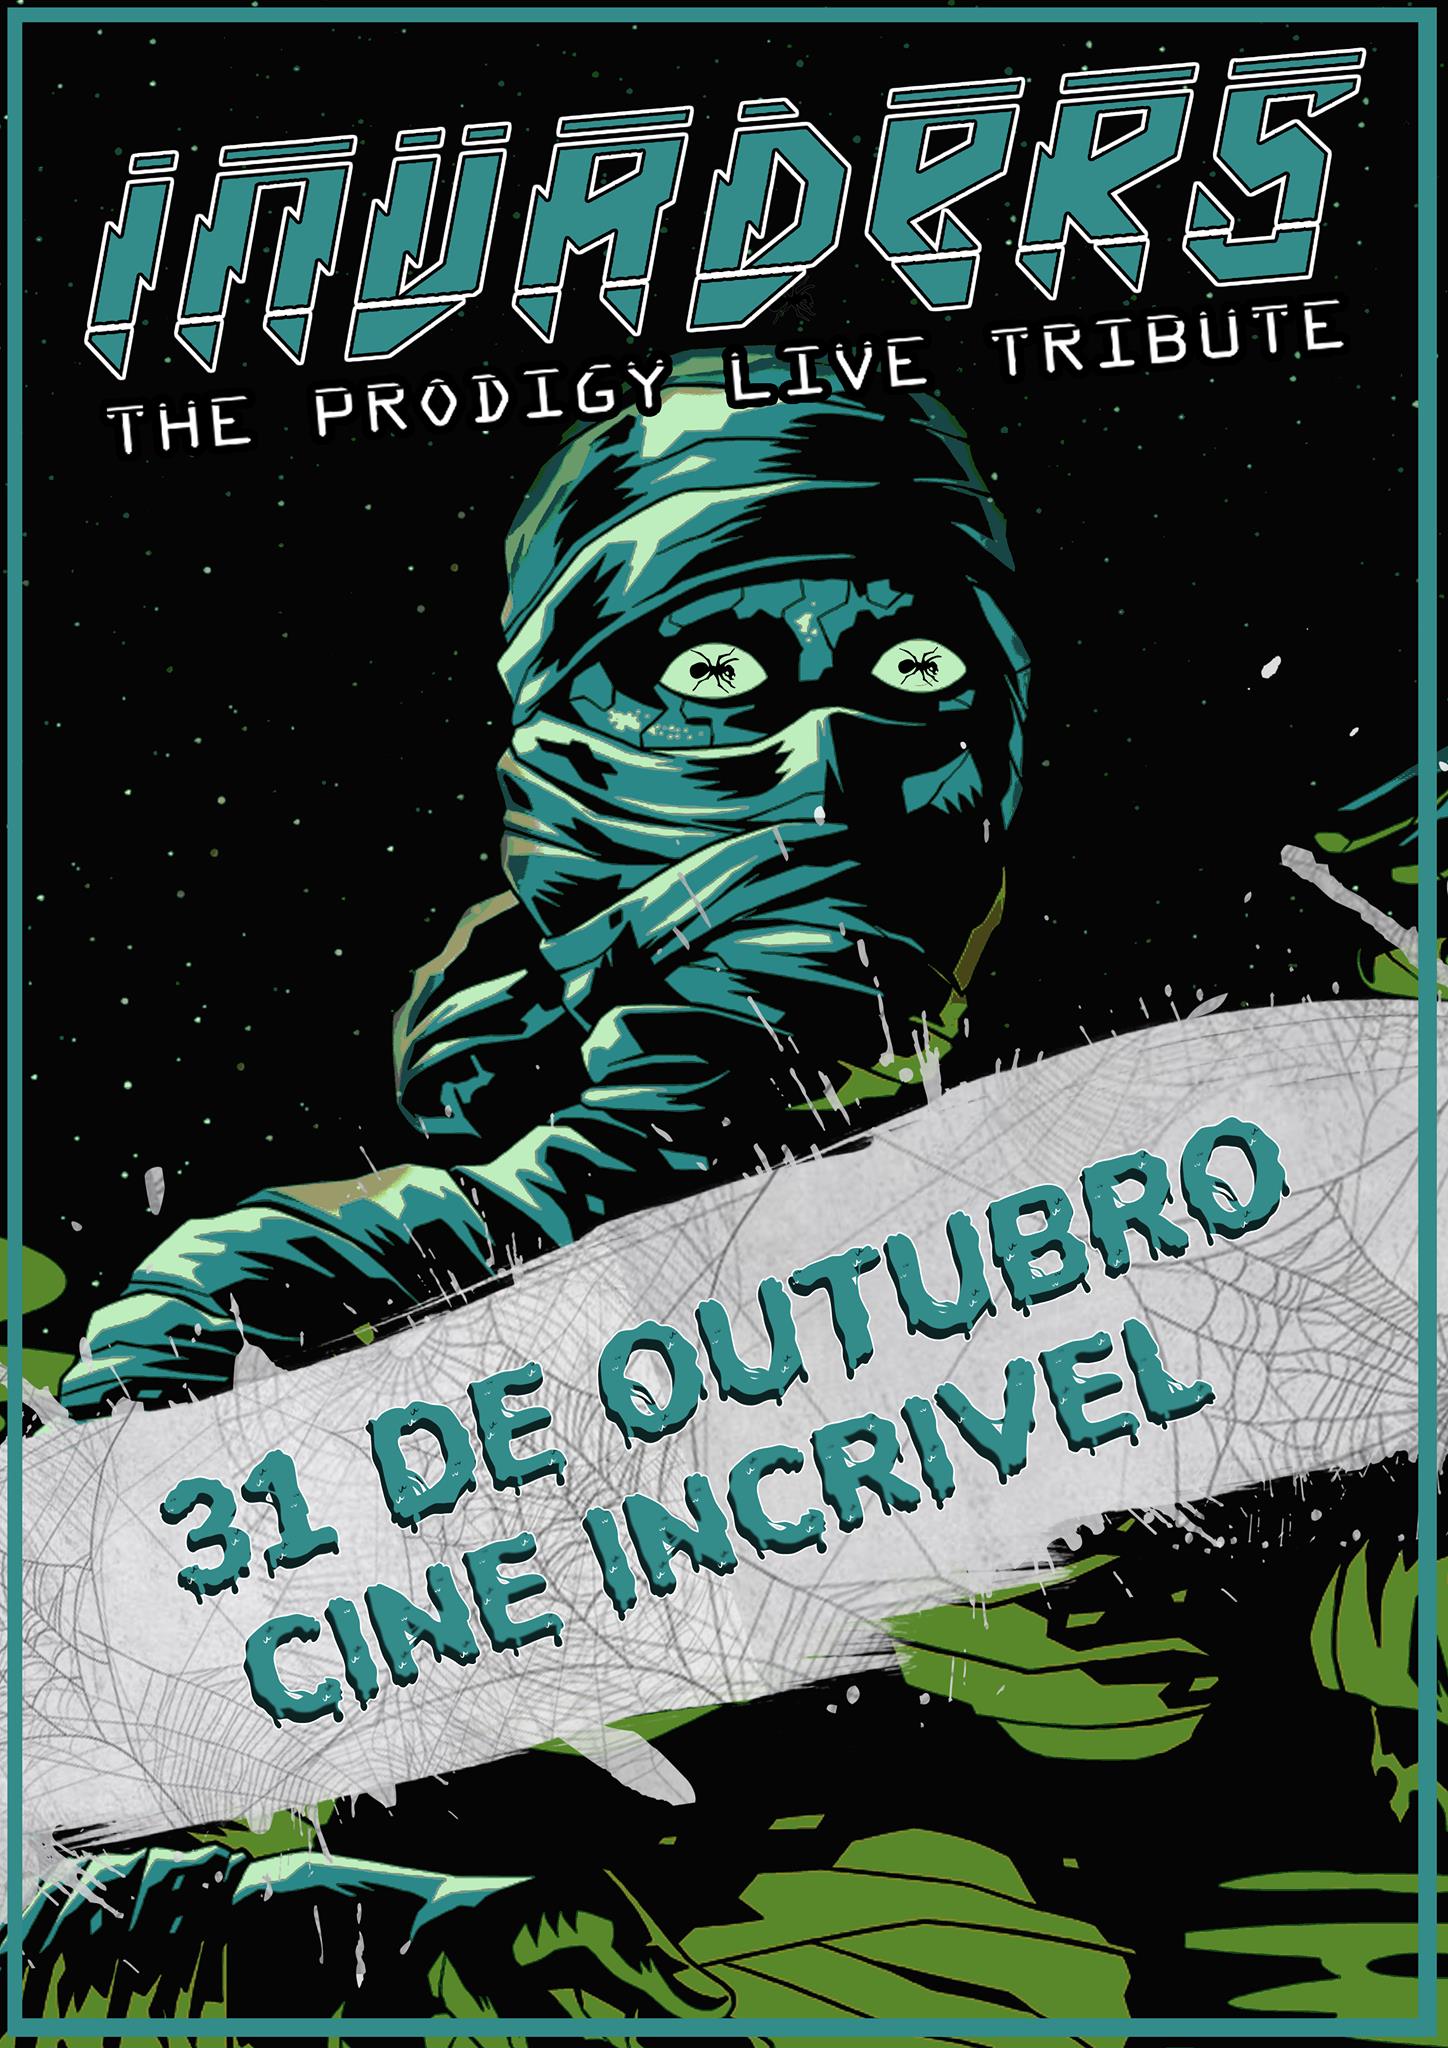 Tributo a The Prodigy (HALLOWEEN PARTY) - Cine Incrivel